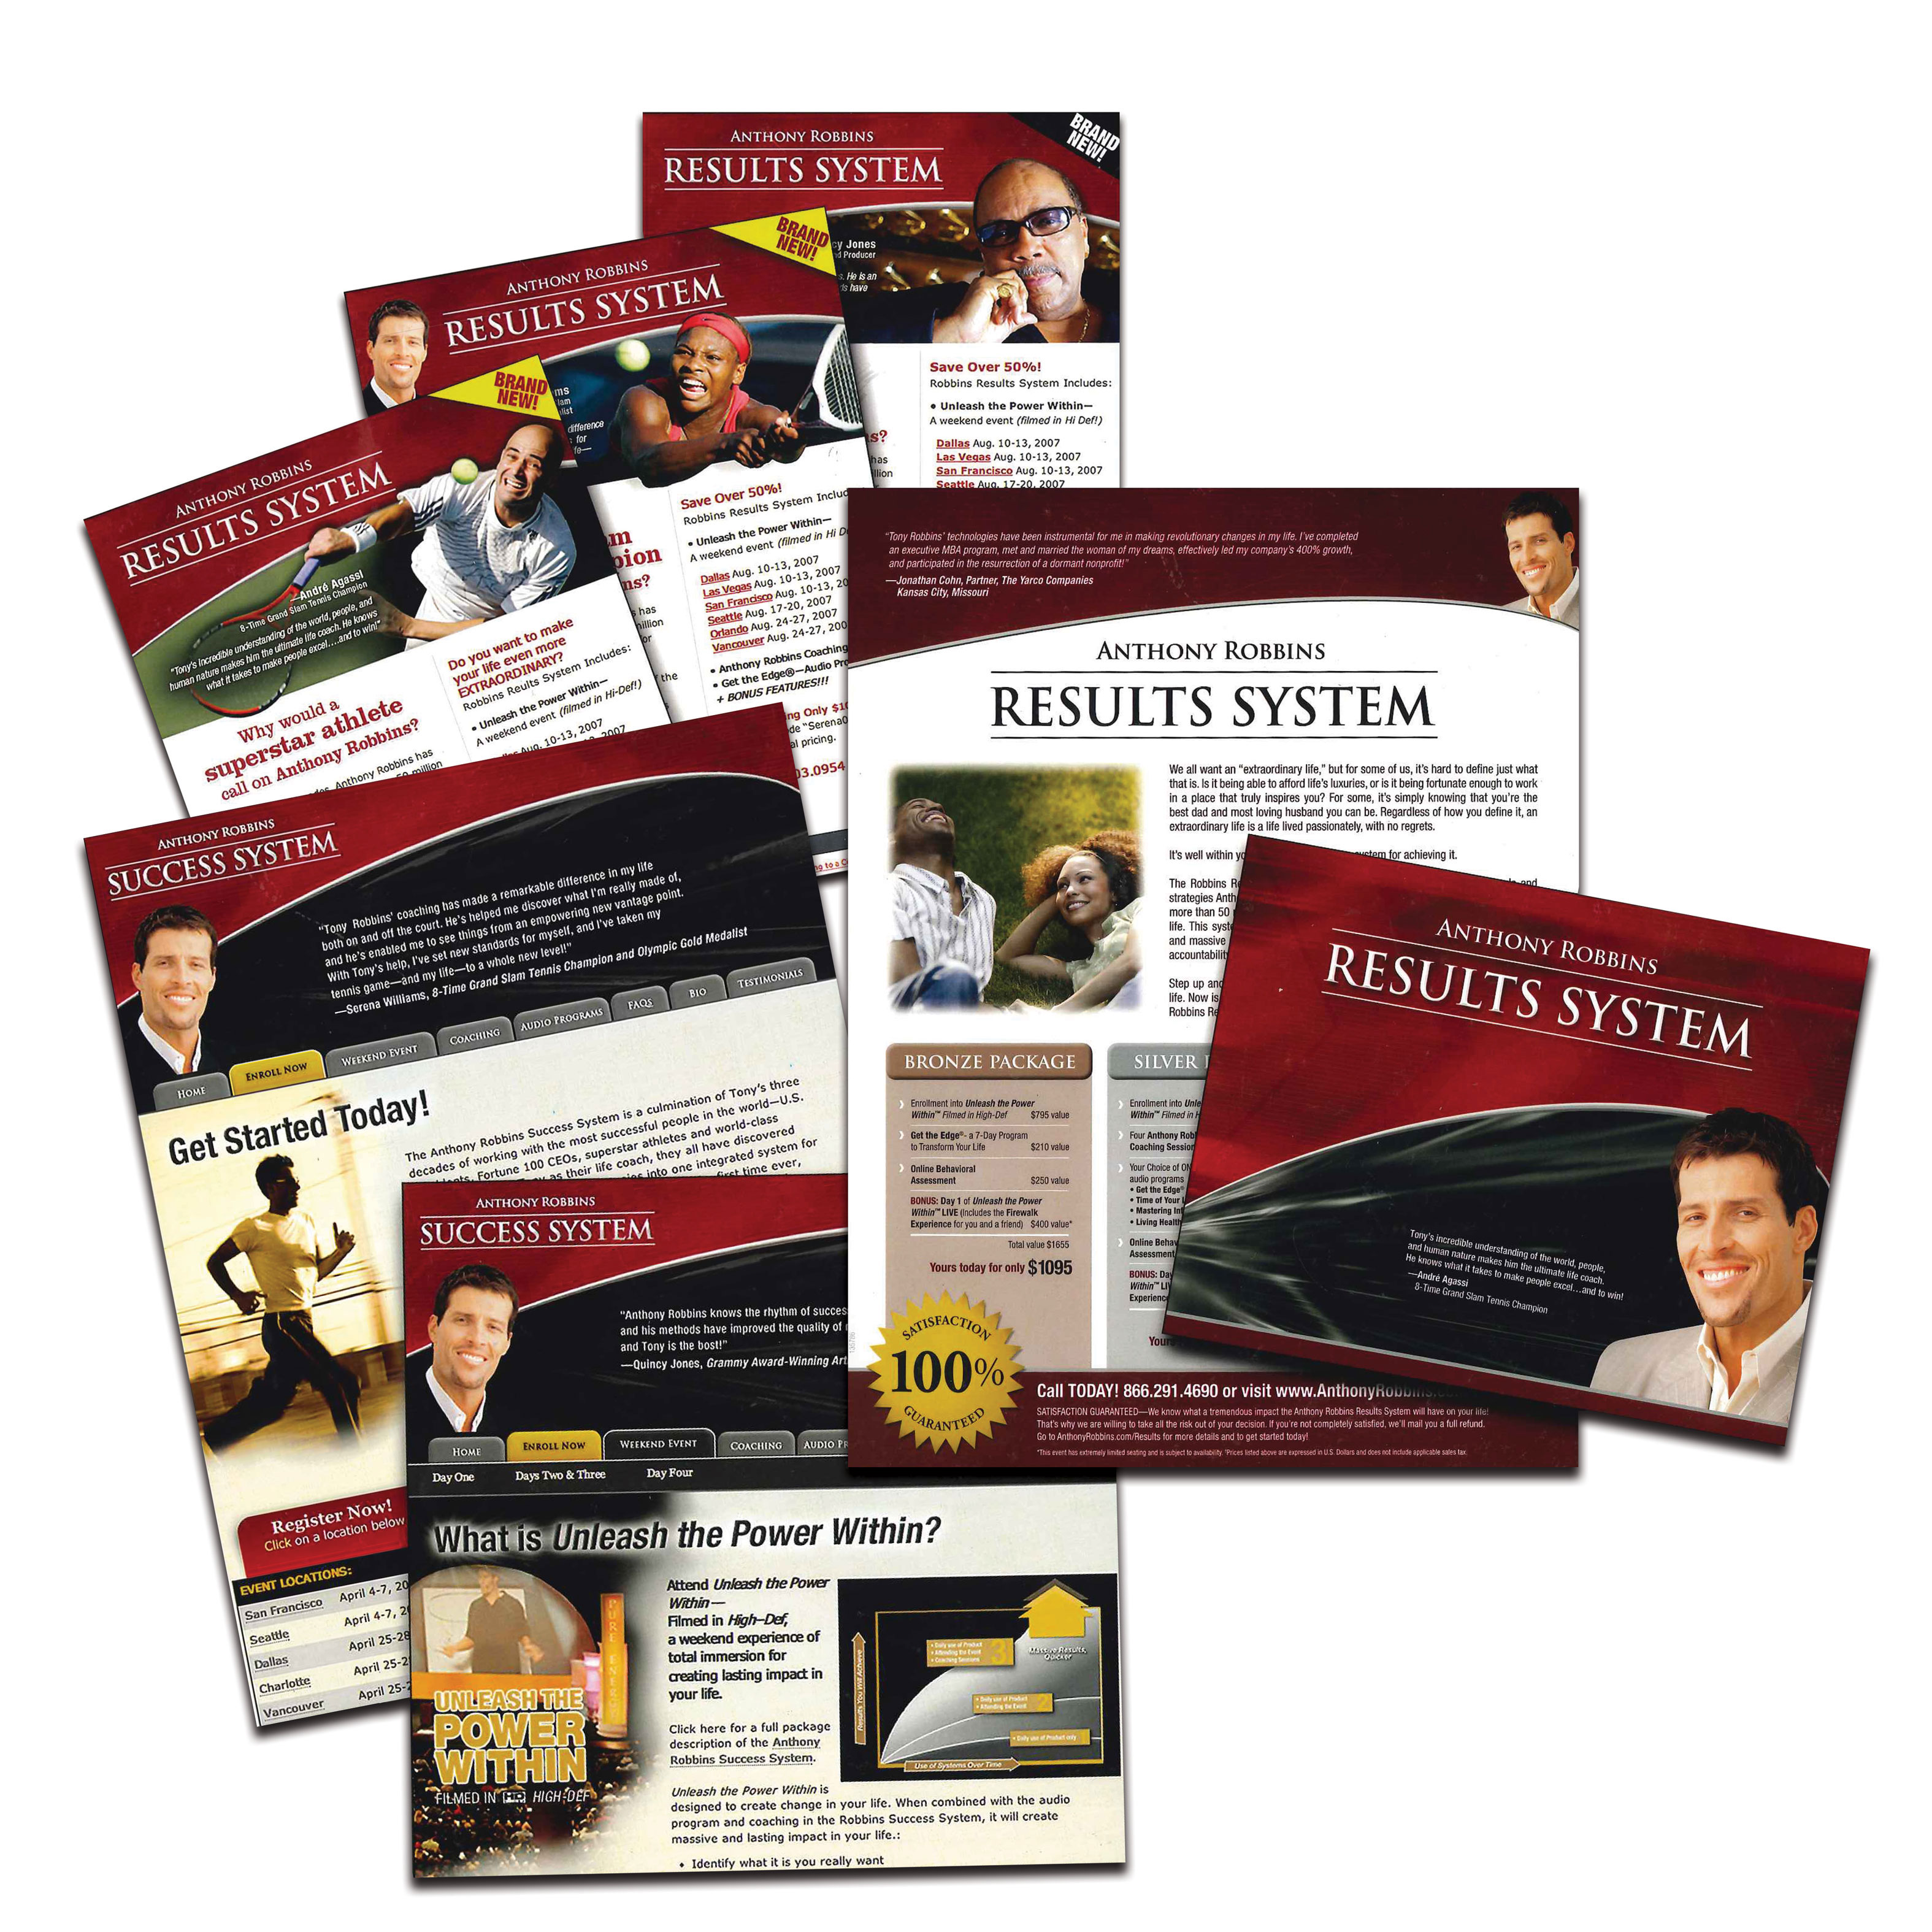 Pictures of different elements created for the Anthony Robbins Results System. I tems include 3 email marketing designs, website design, flyer design and brochure design.